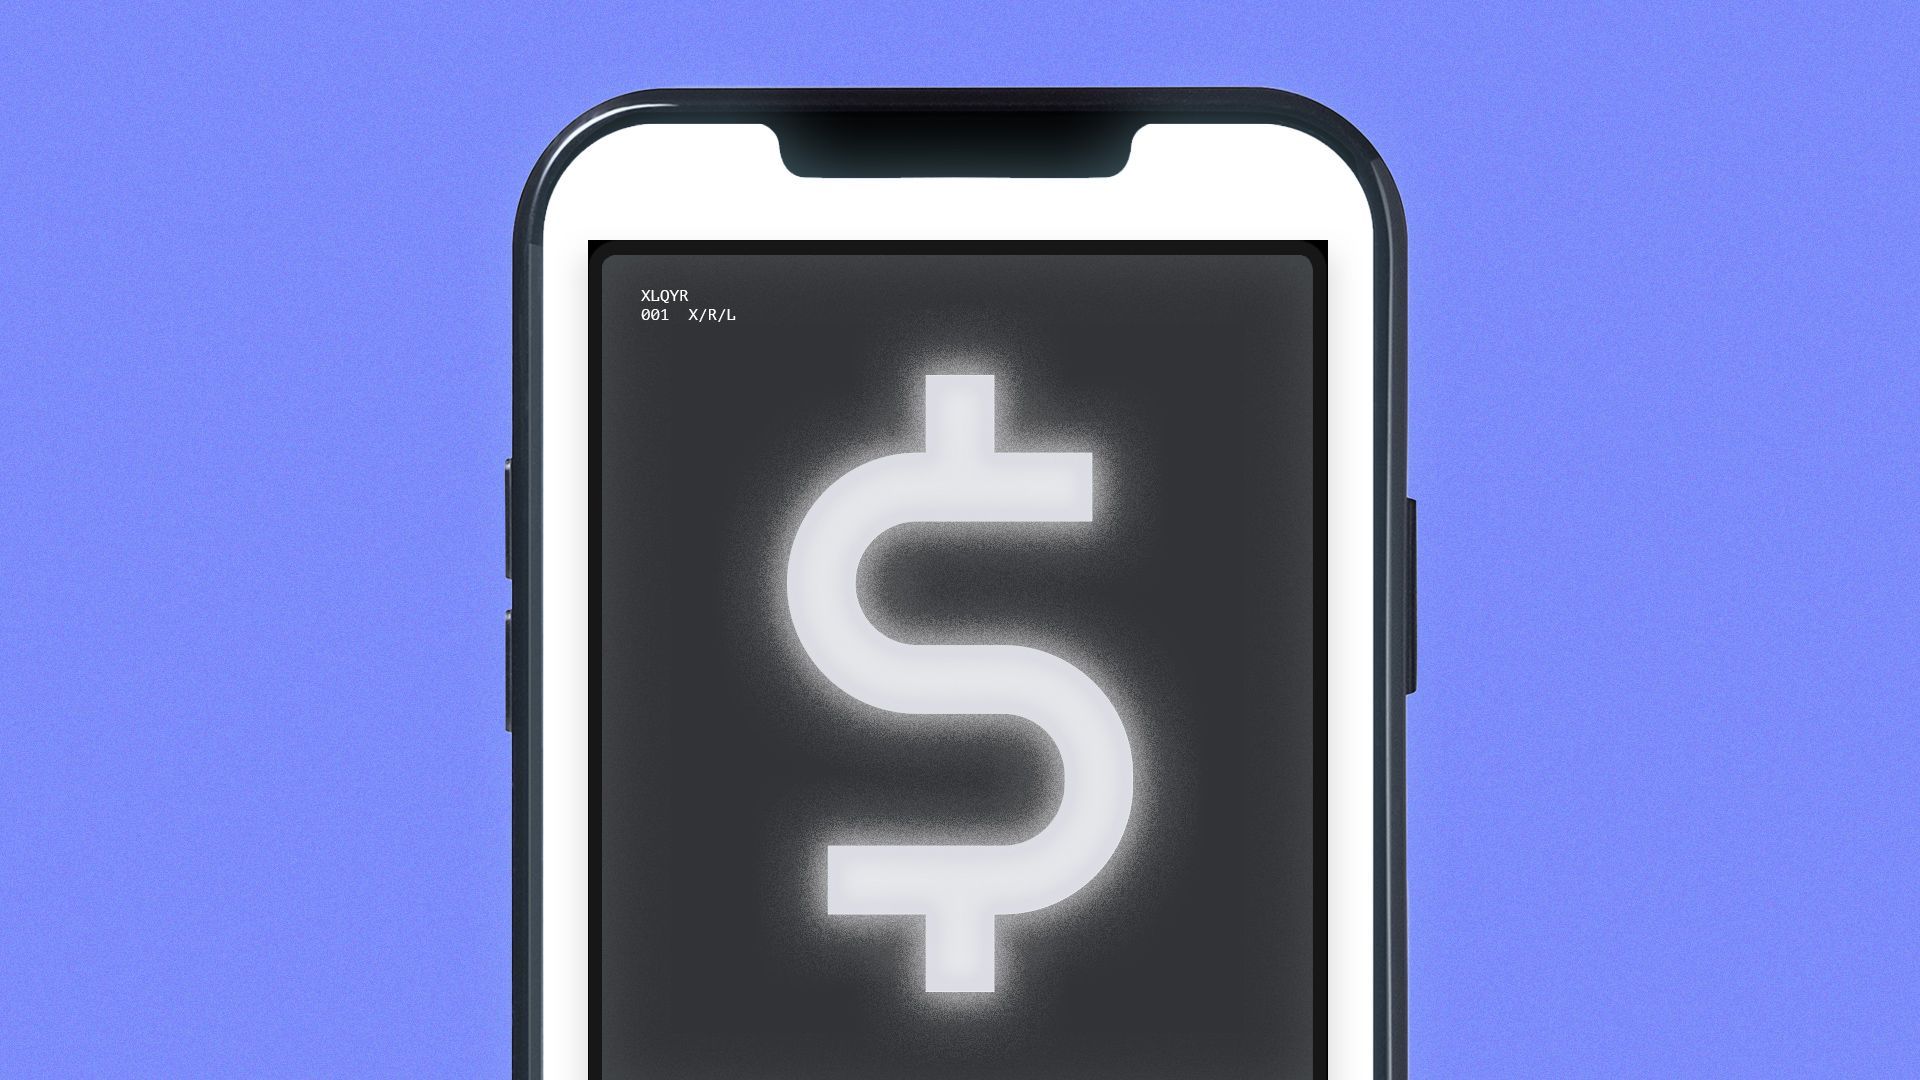 Illustration of a phone with an x-ray image of a dollar sign.